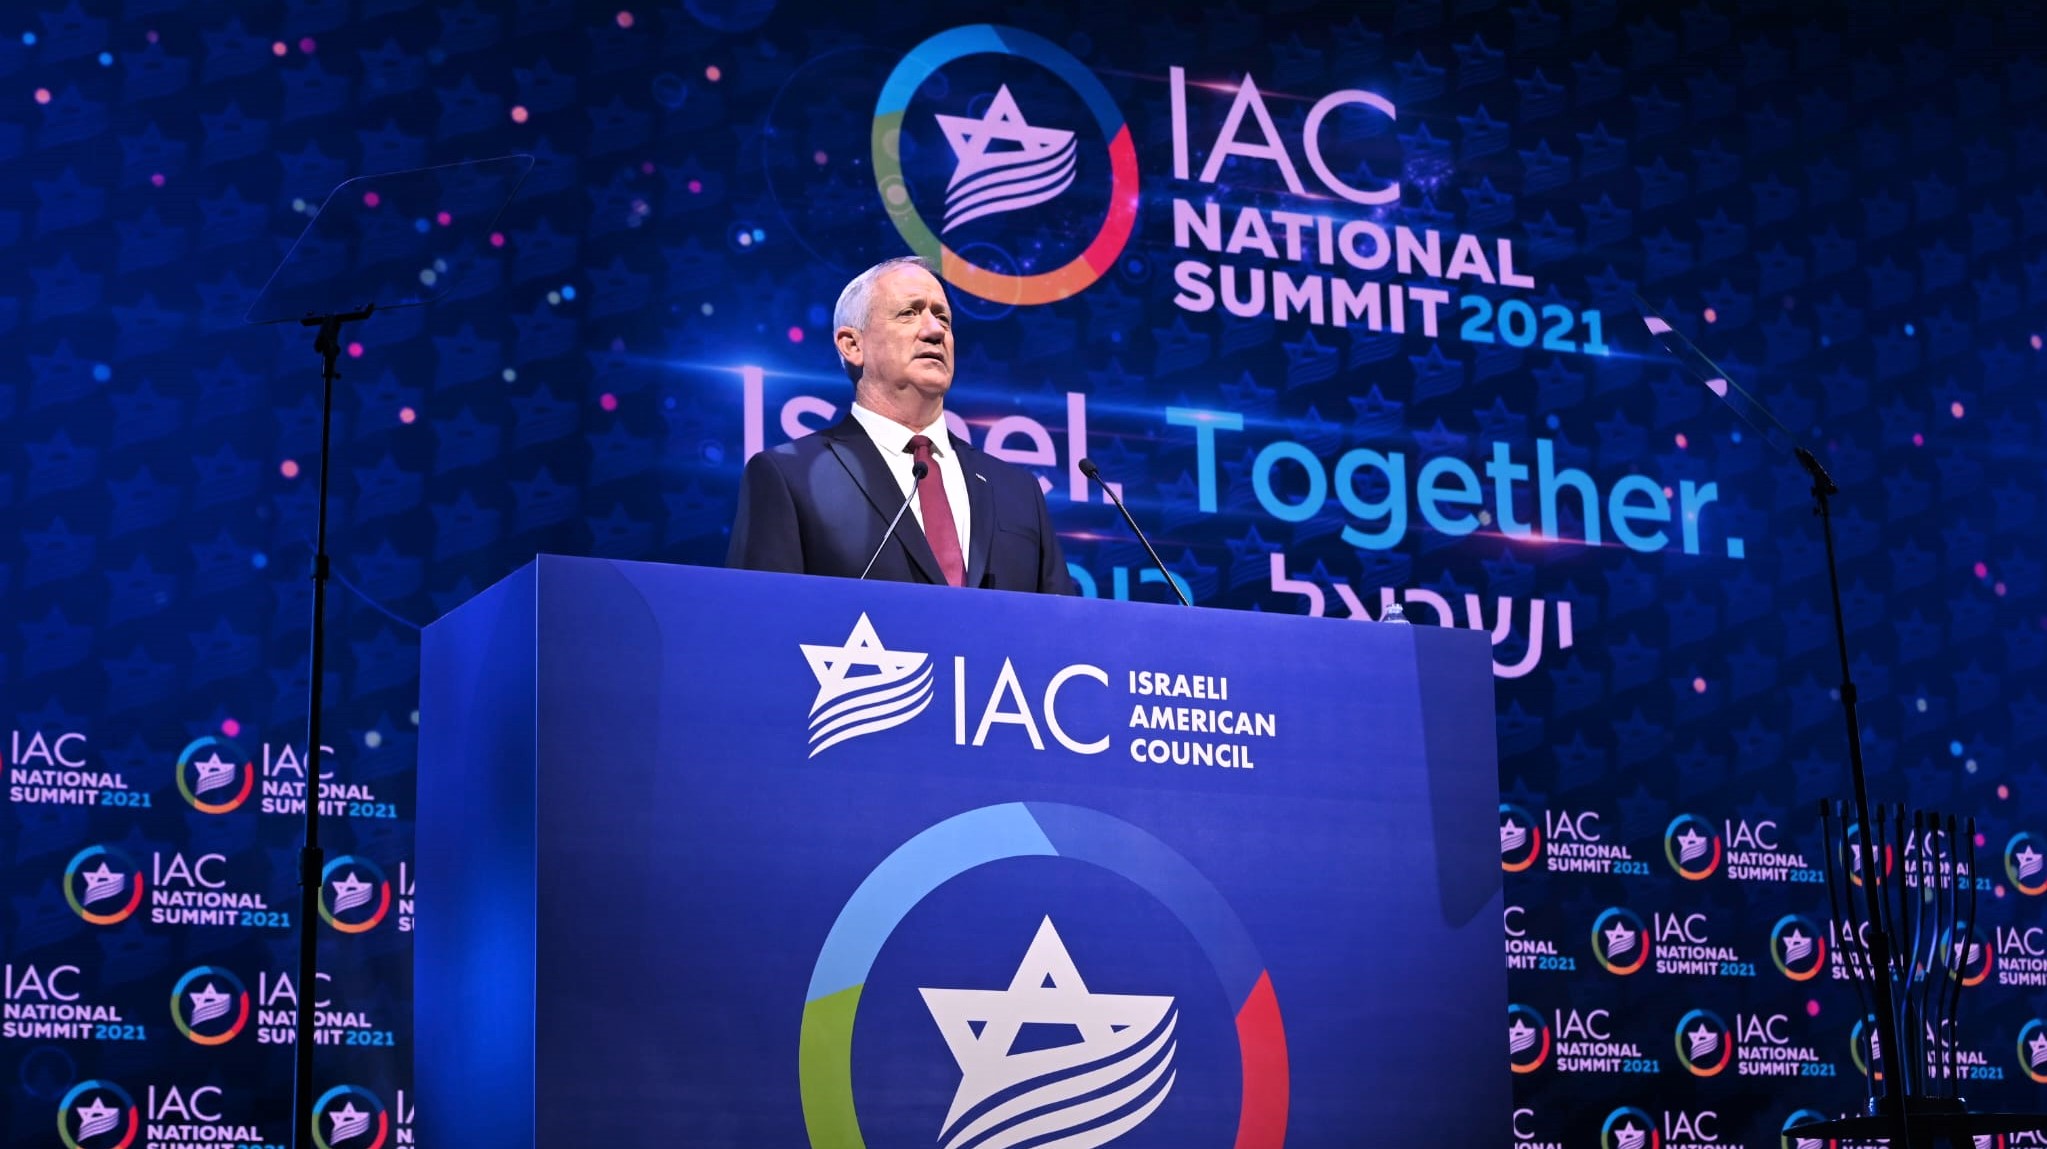 At IAC summit, Israel’s defense minister points out key threat to